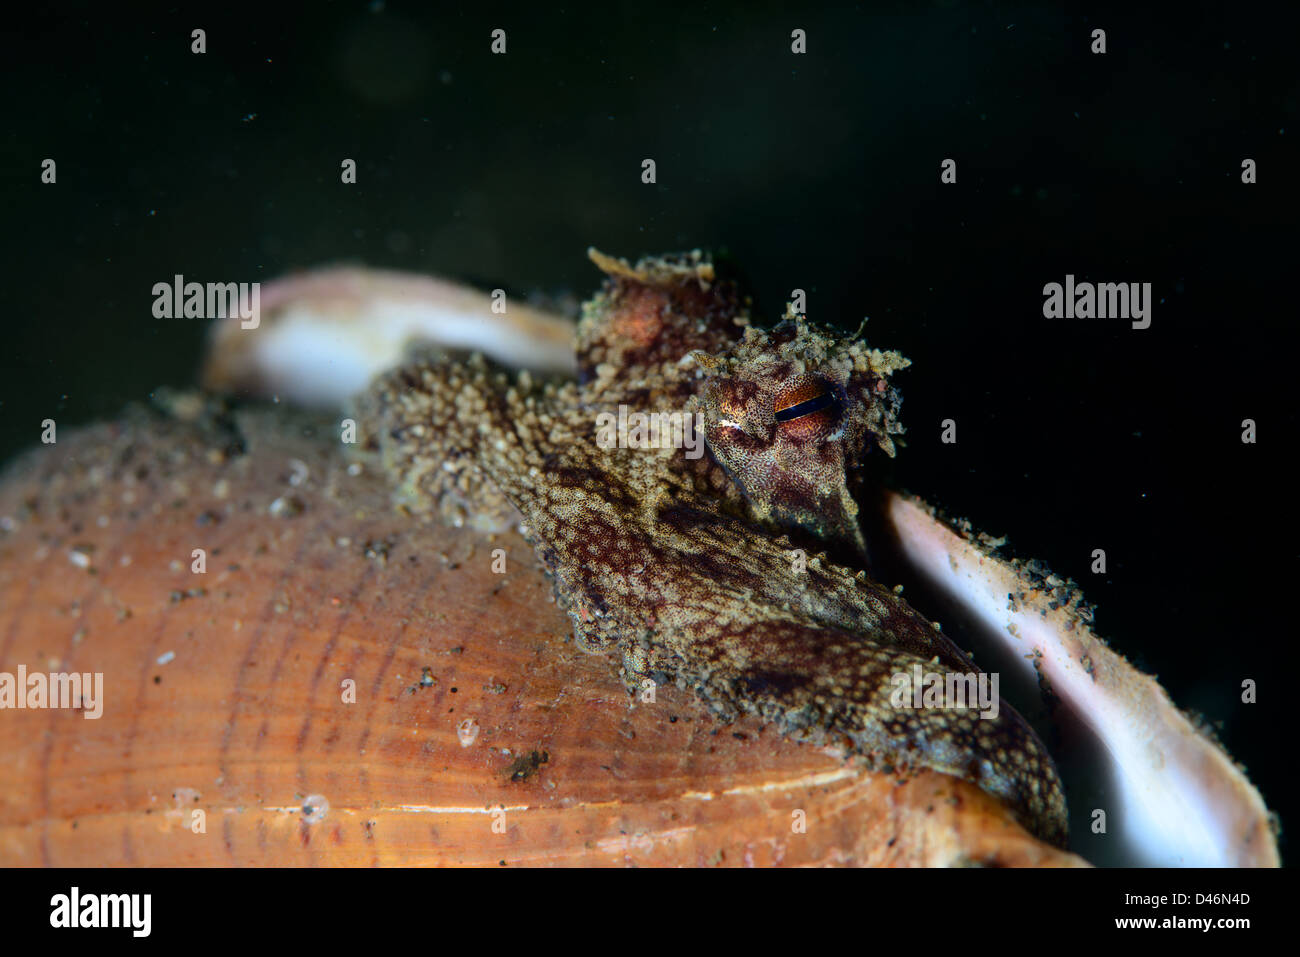 A coconut octopus takes a pic out from the shell where it hides. Indonesia Bali Stock Photo